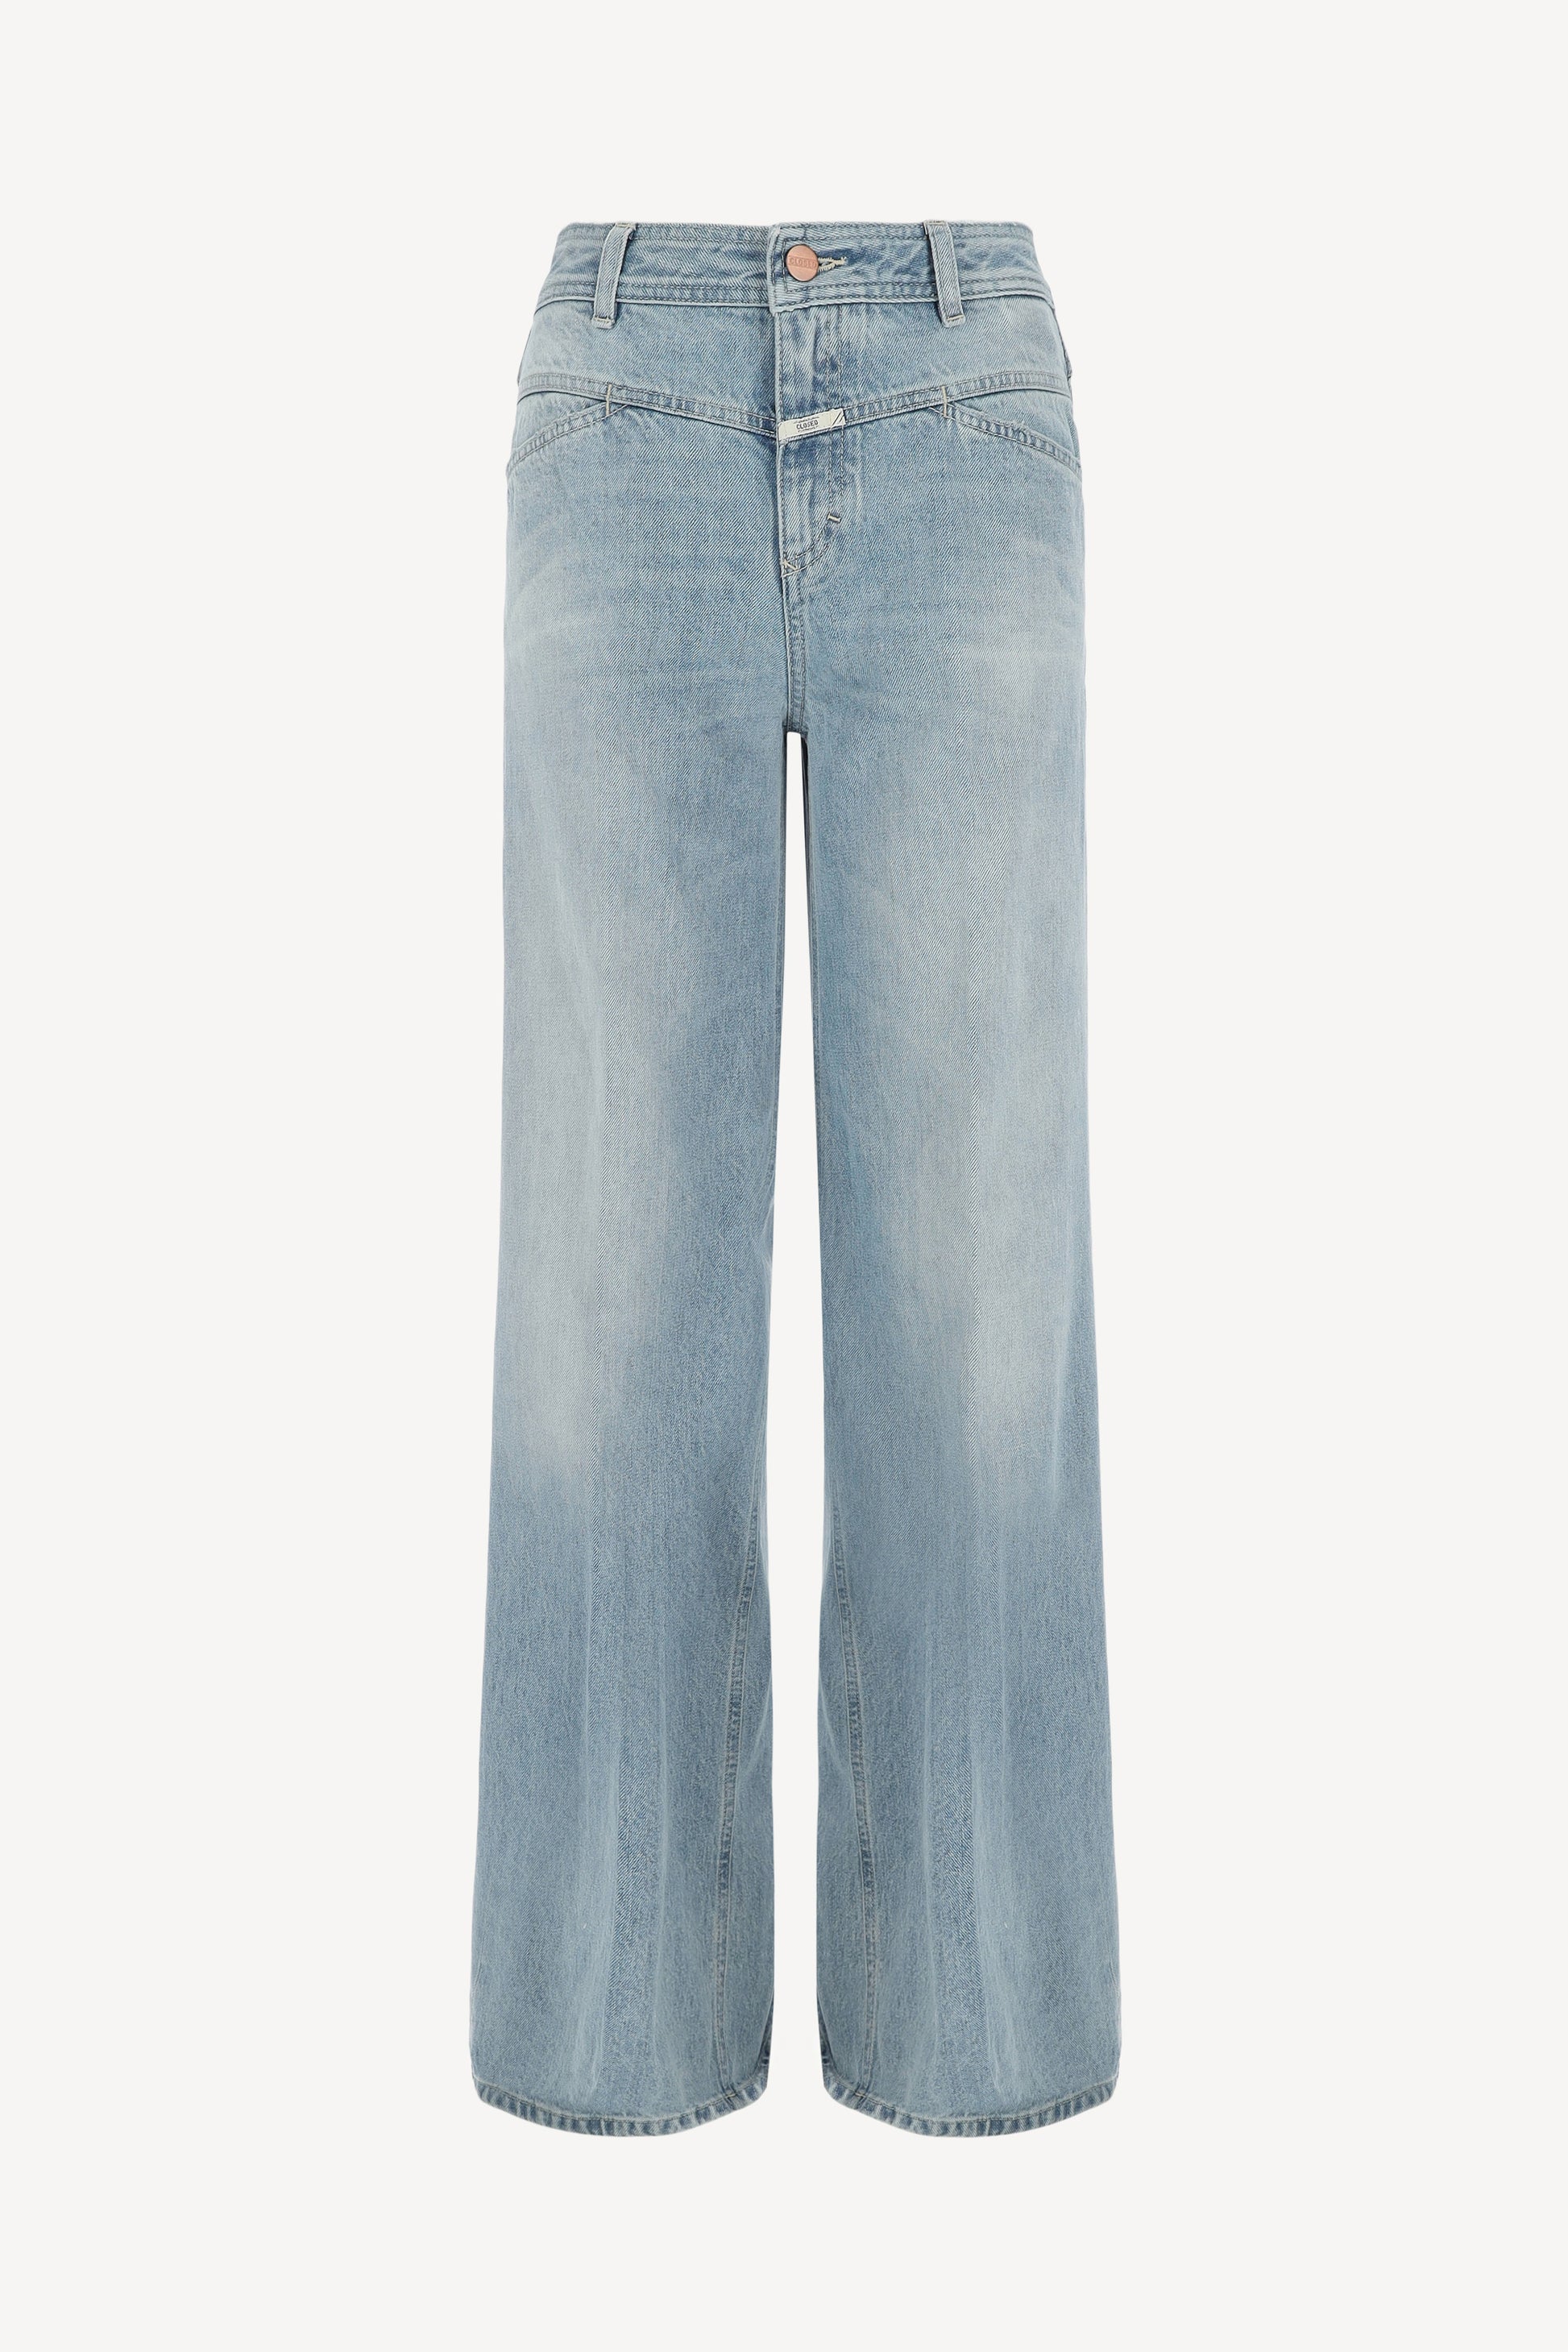 Jeans Flared-X in Light BlueClosed - Anita Hass